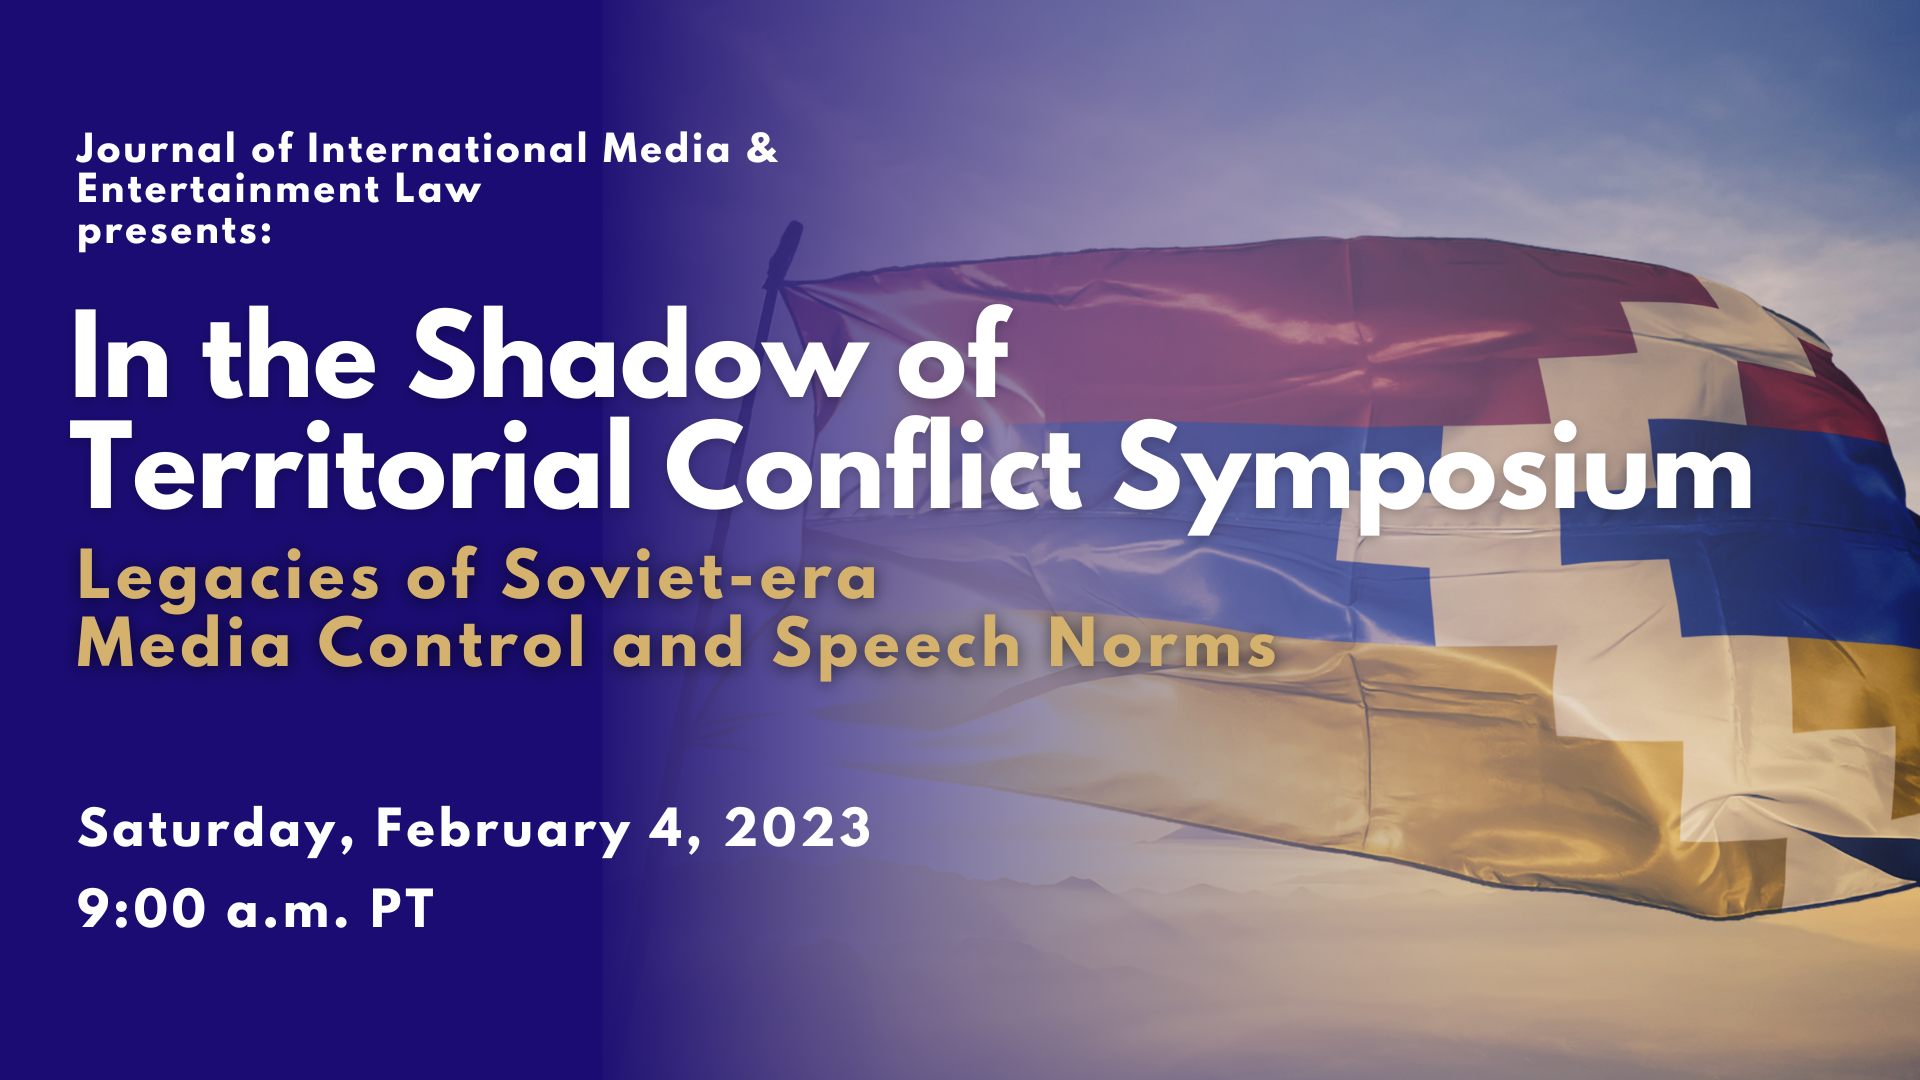 In The Shadow of Territorial Conflict Symposium: Legacies of Soviet-era Media Control and Speech Norms